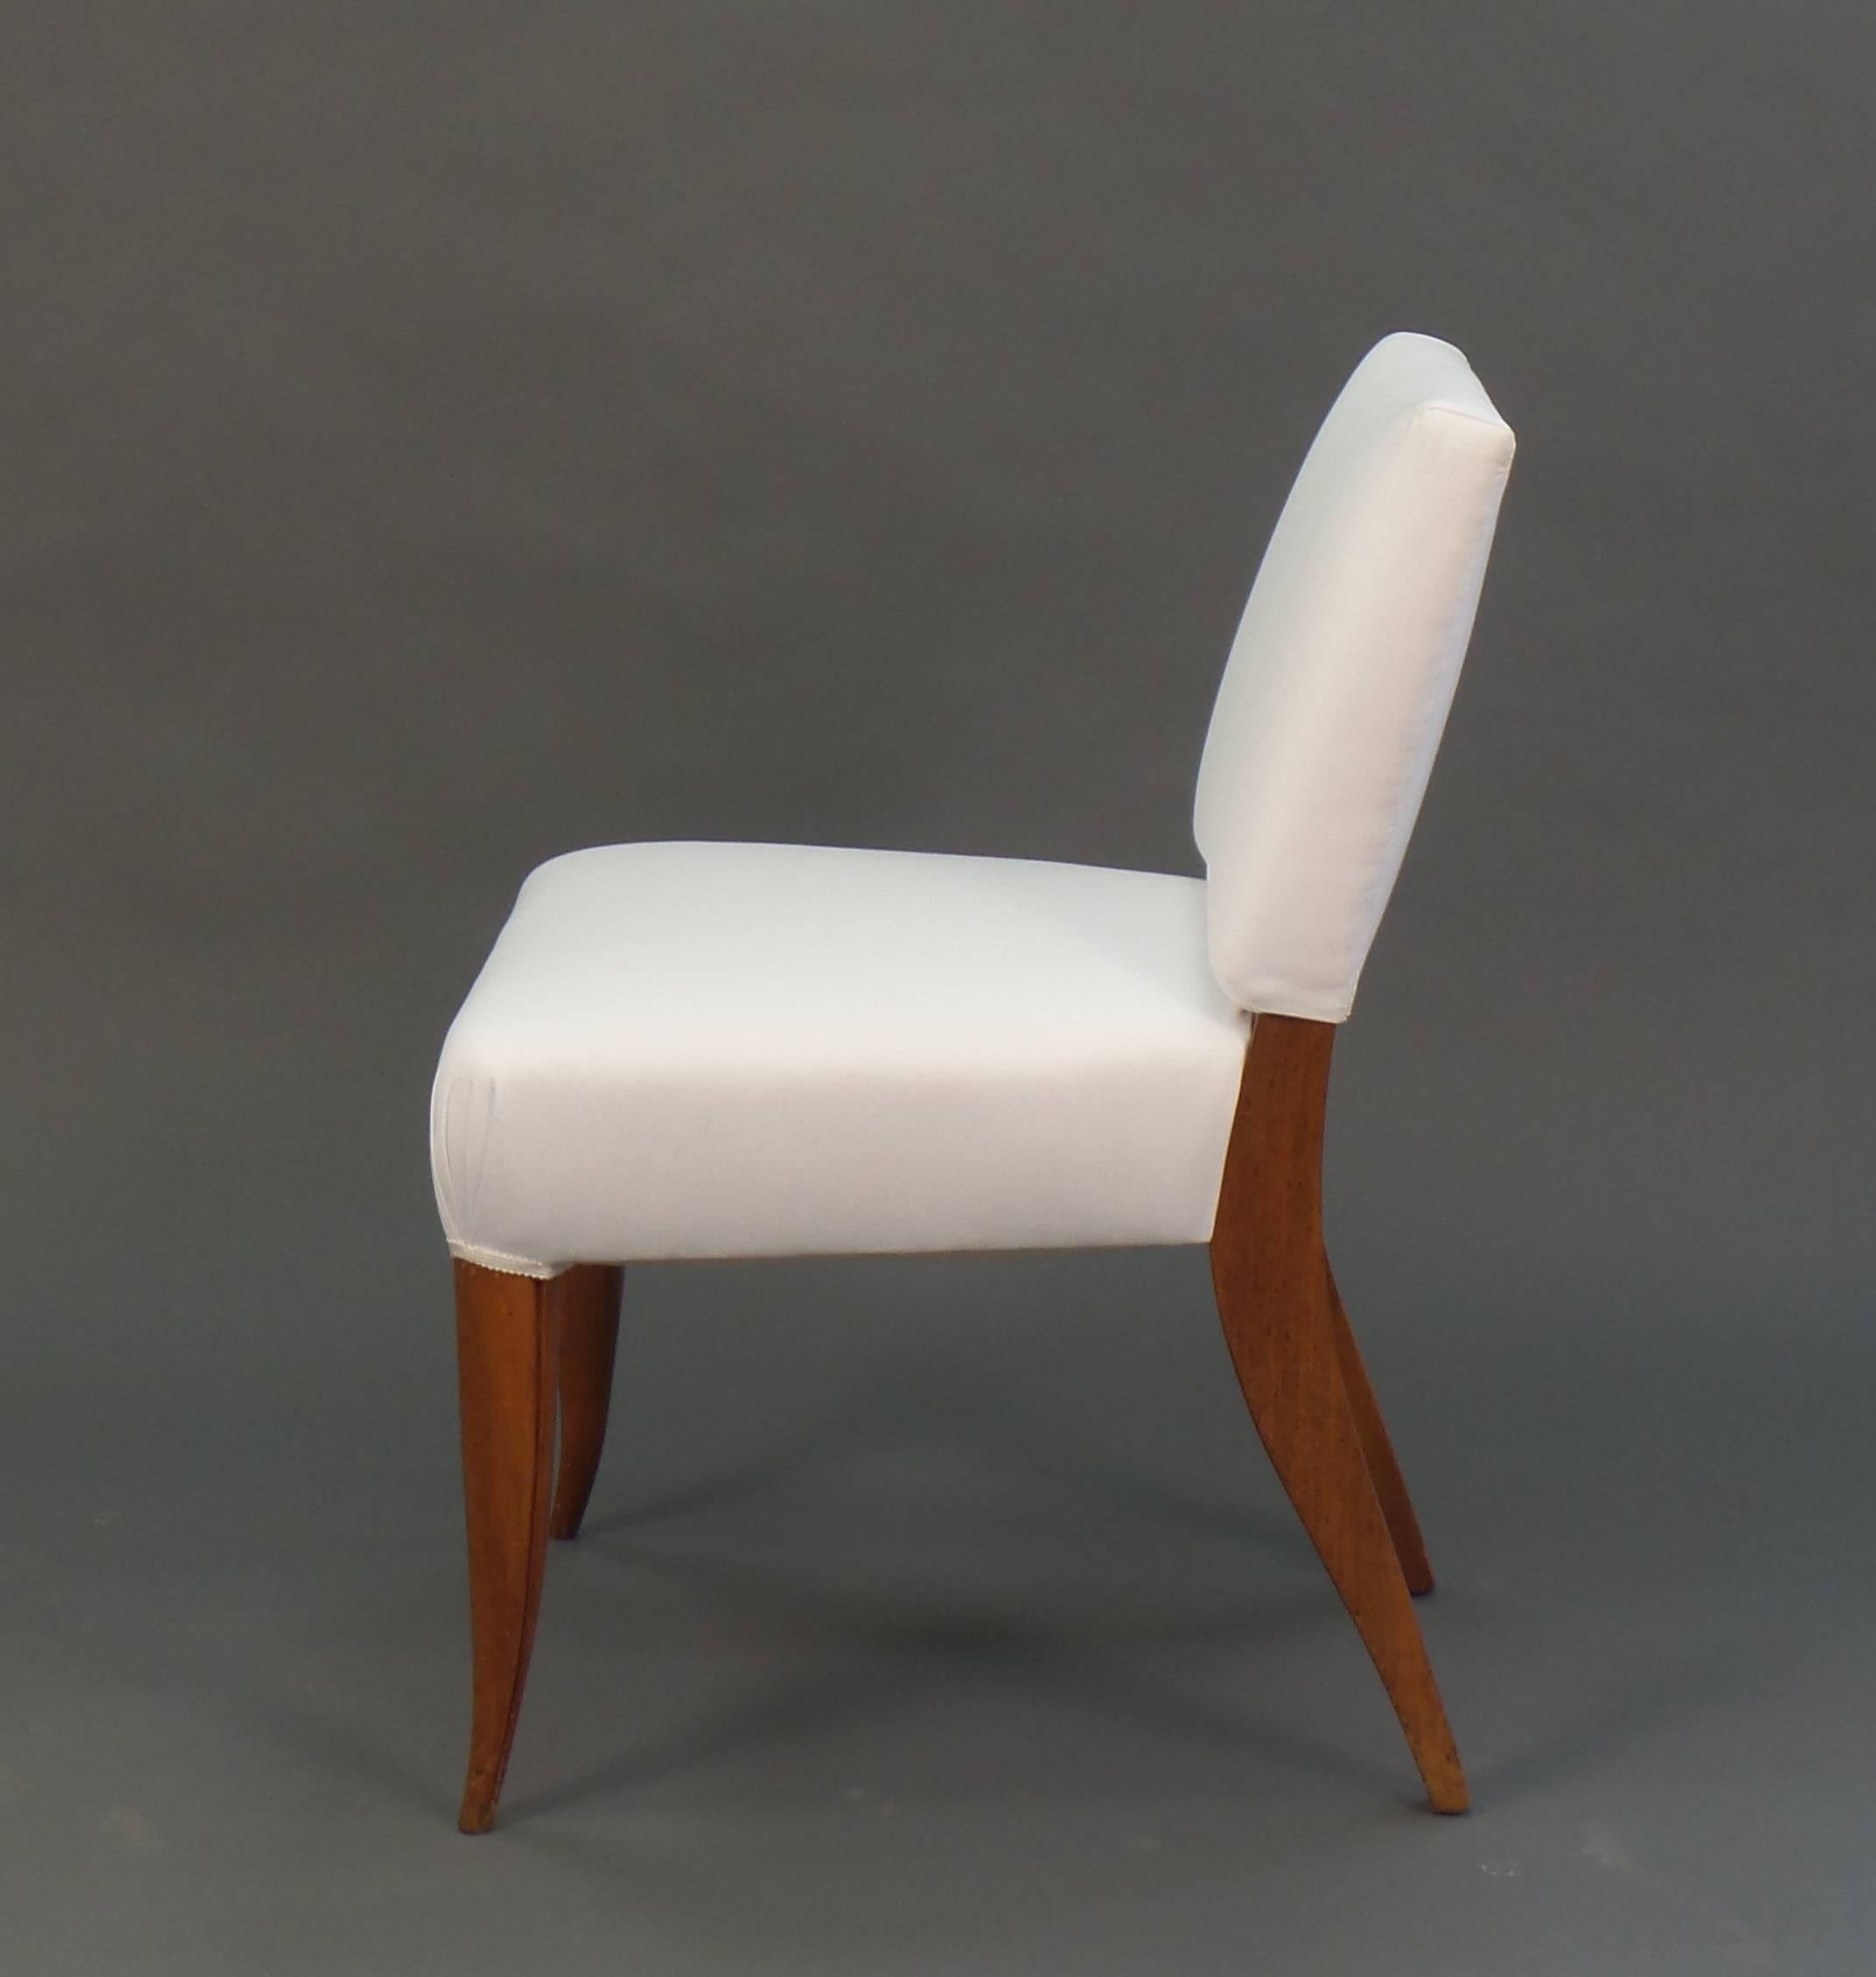 A graceful Art Deco style side chair with shaped sabre-form front legs. Shown in muslin. Custom finishes and upholstery options available. Approximately 6 - 8 weeks lead time, please confirm and notify Victoria & Son of any deadlines.